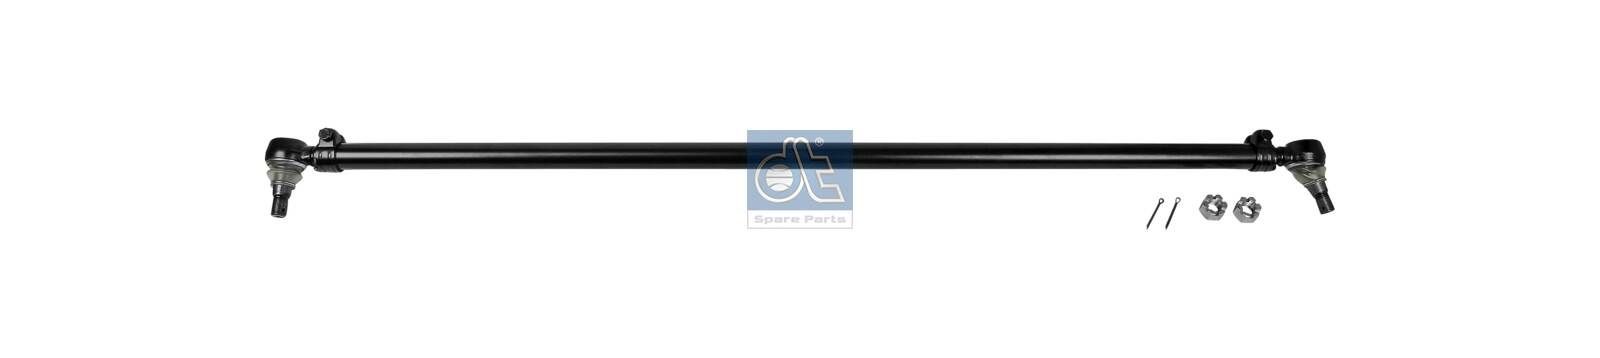 DT Spare Parts 2.53116 Rod Assembly 7421 262 030